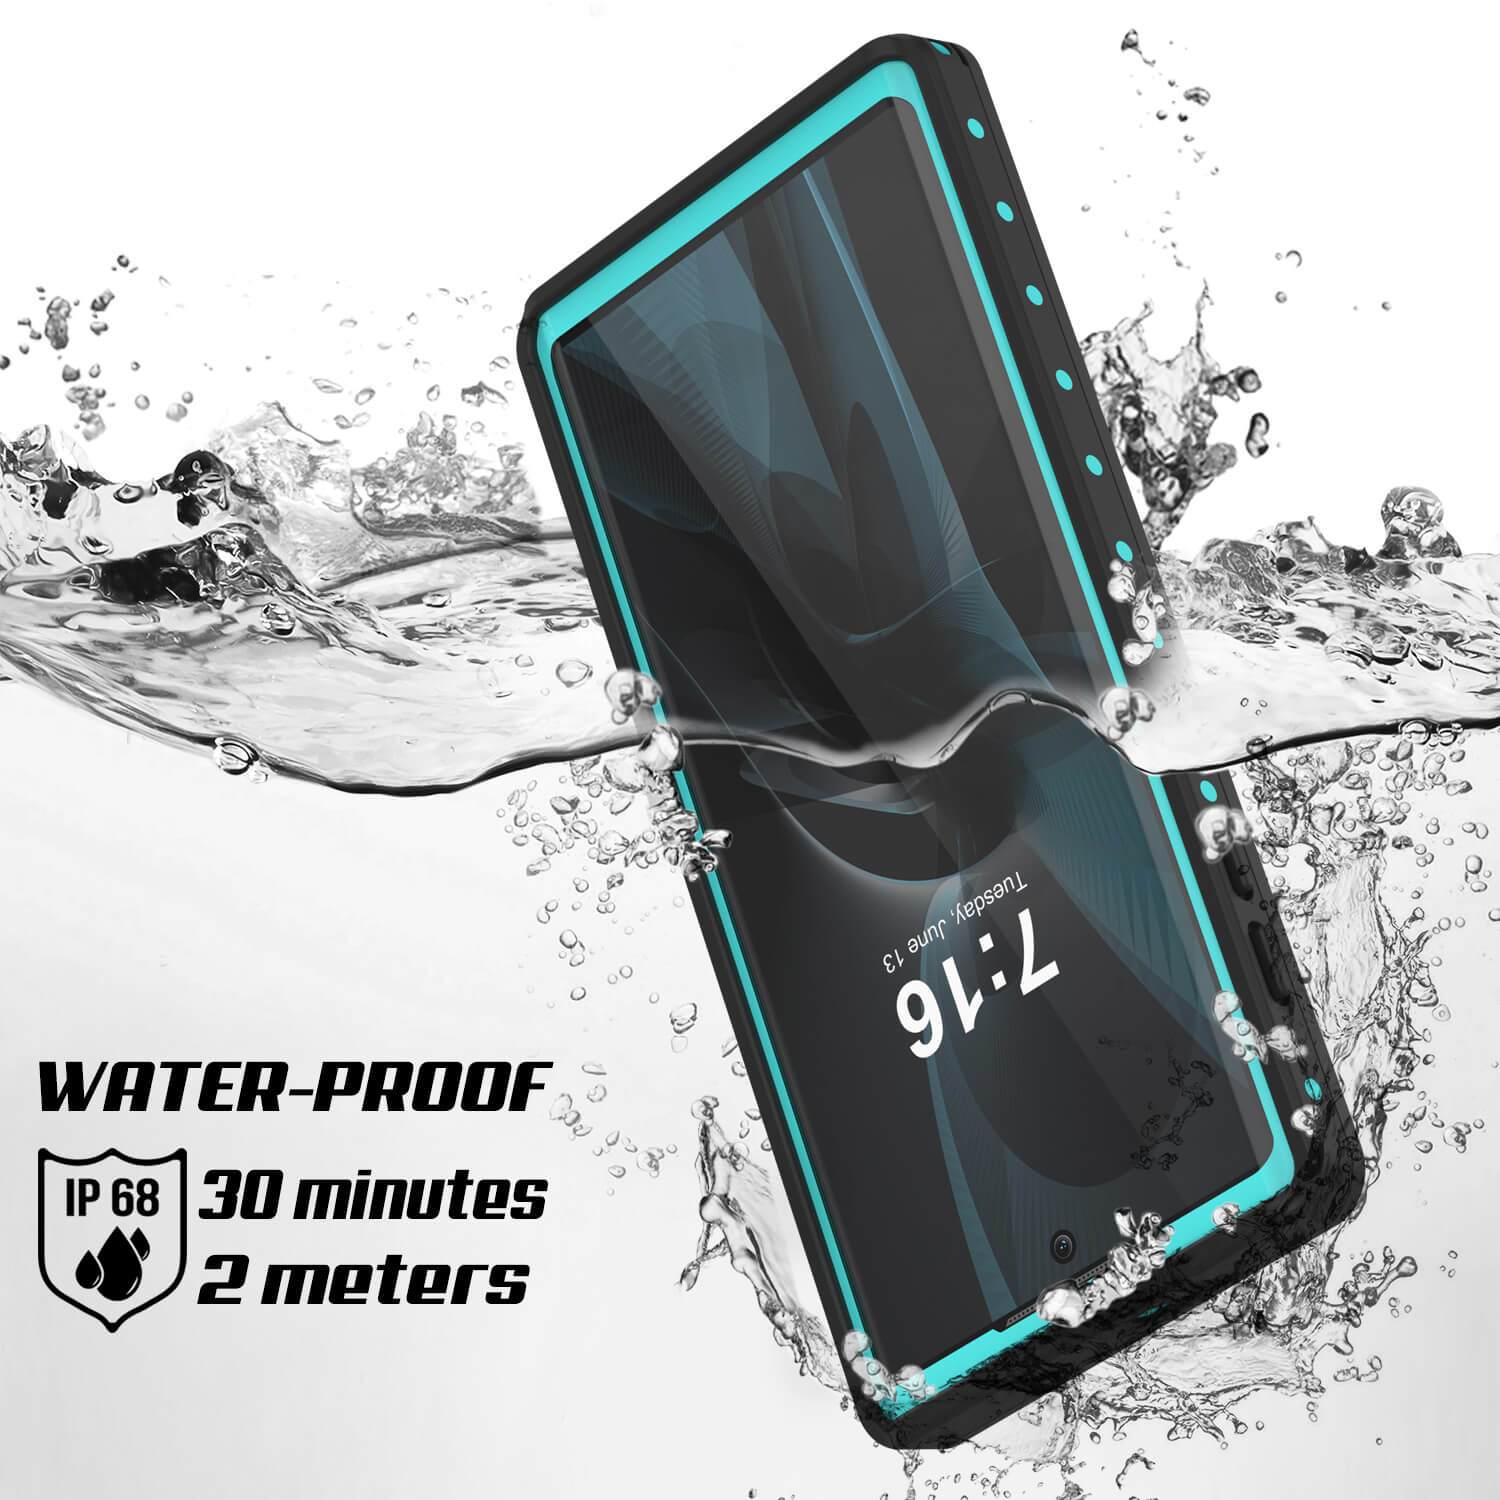 Galaxy Note 10+ Plus Waterproof Case, Punkcase Studstar Series Teal Thin Armor Cover